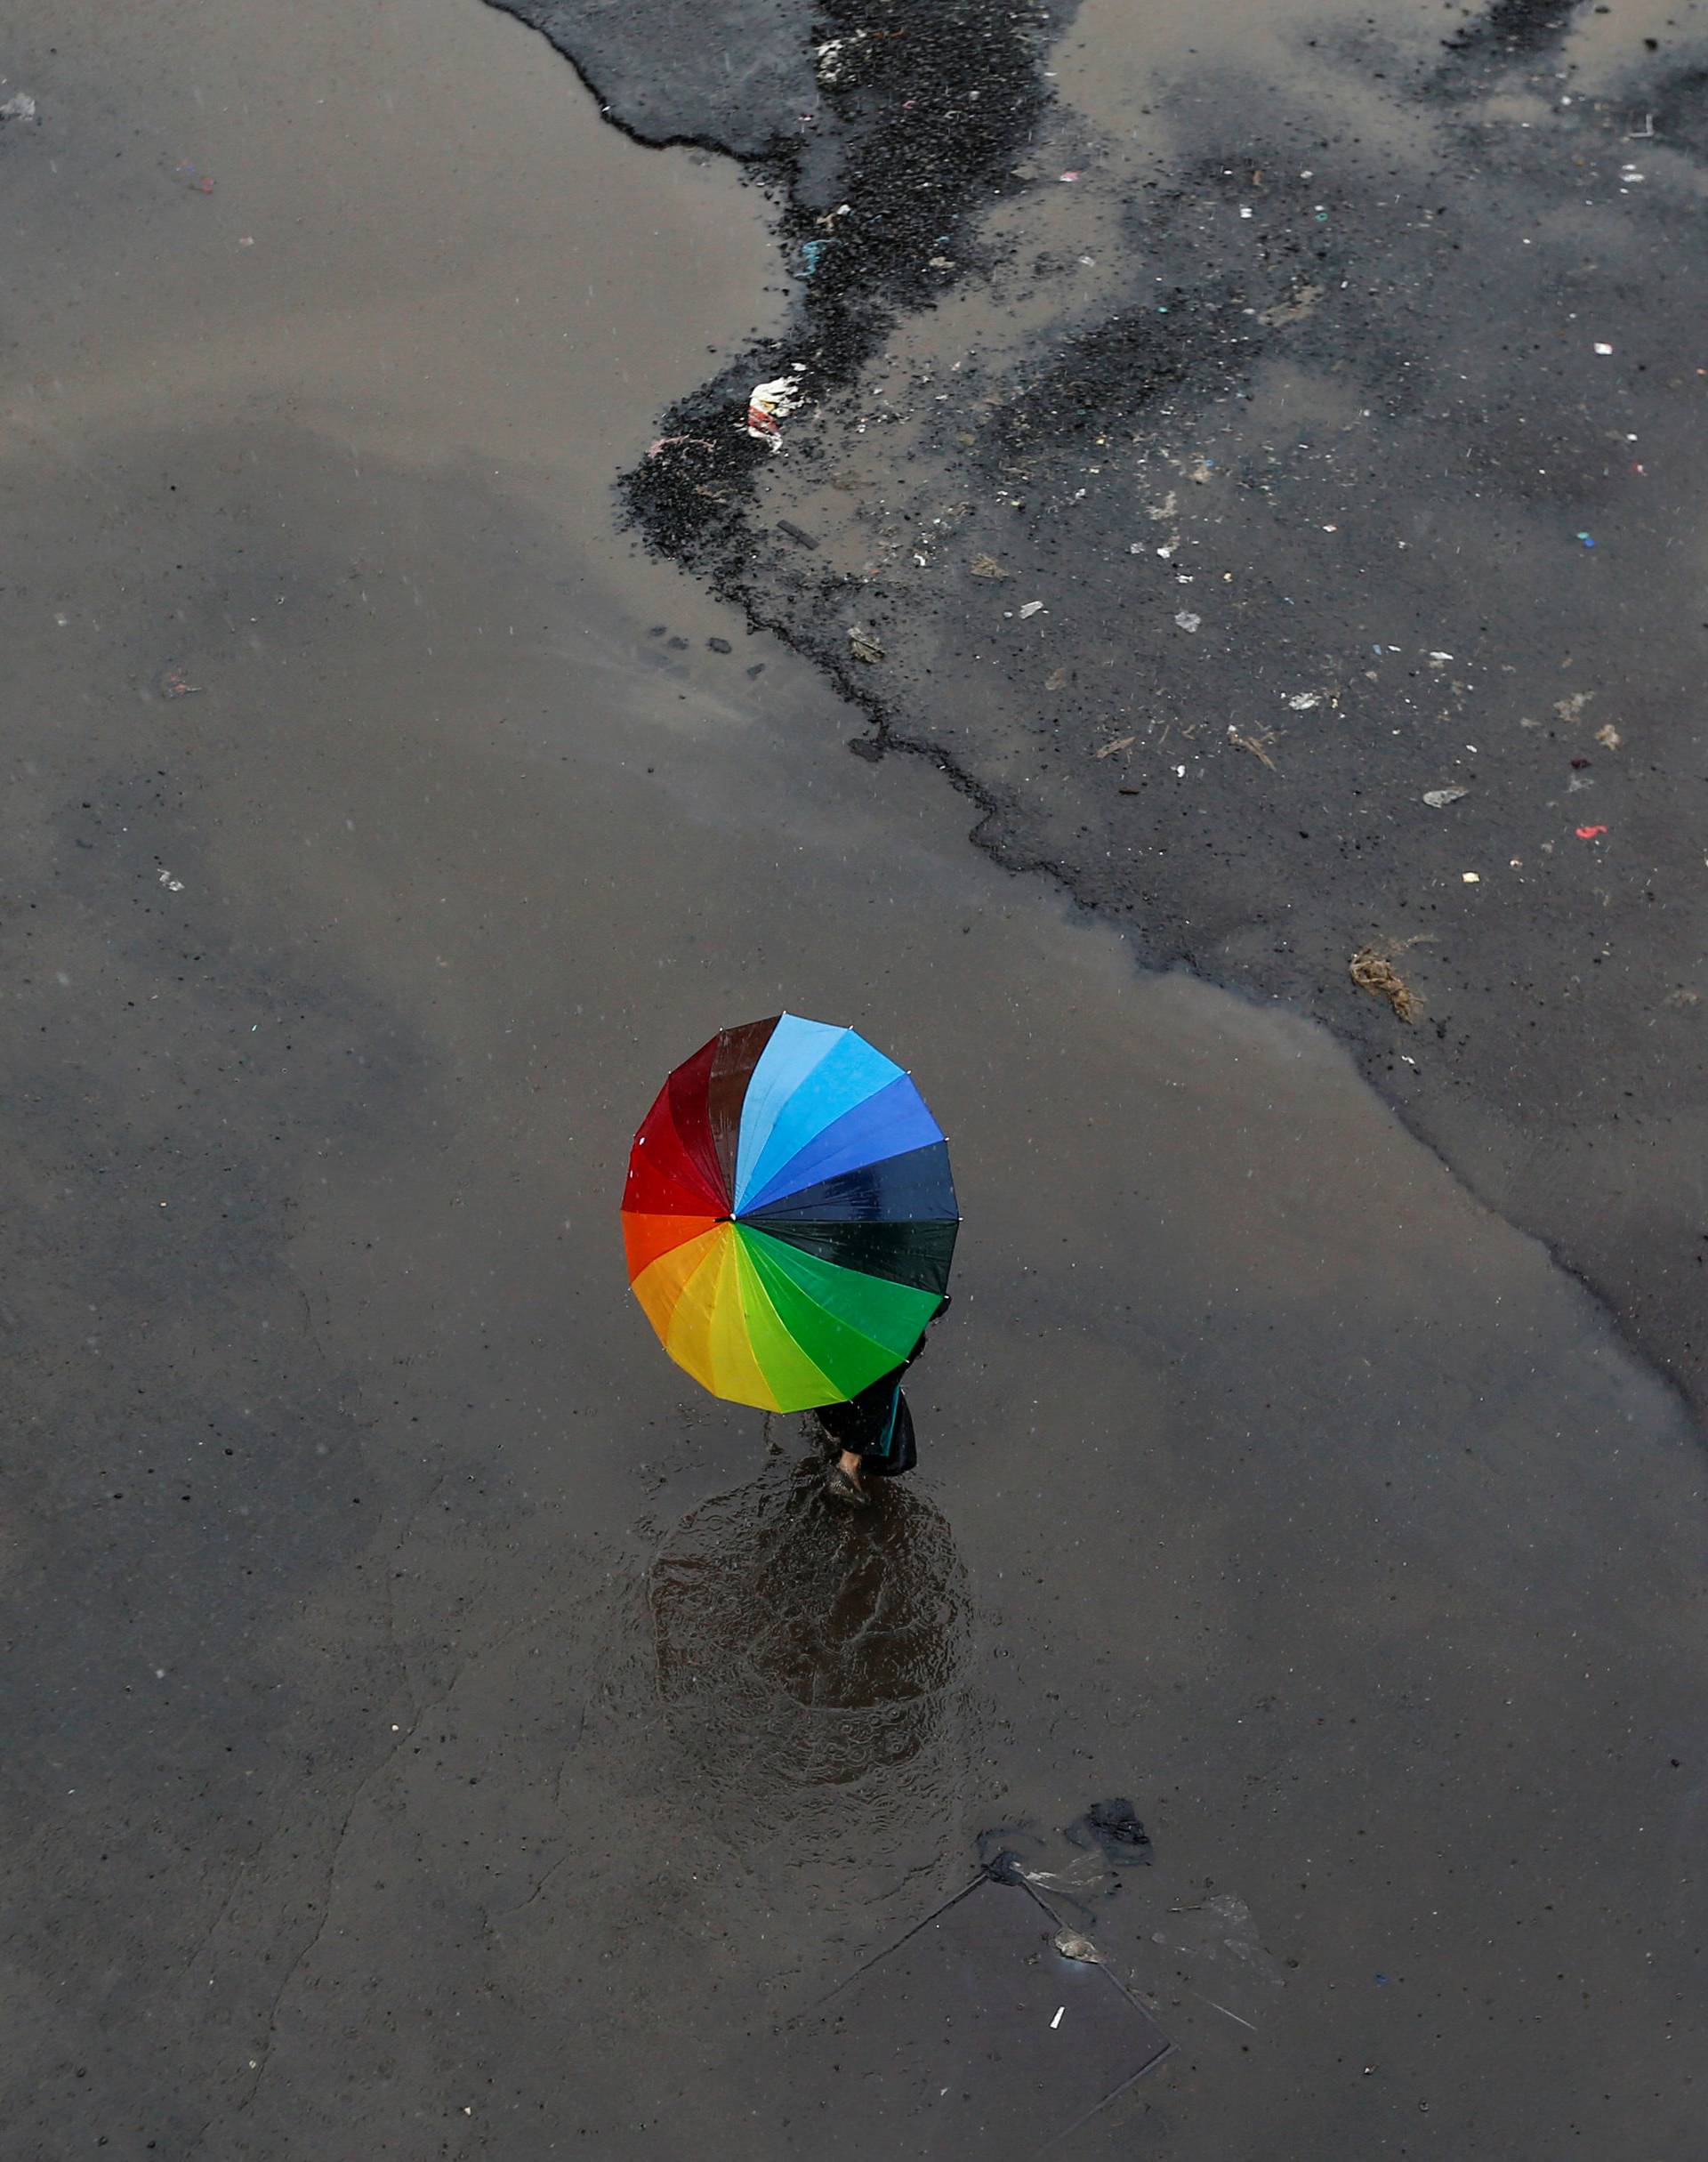 A woman carrying an umbrella crosses a flooded street as it rains in Mumbai